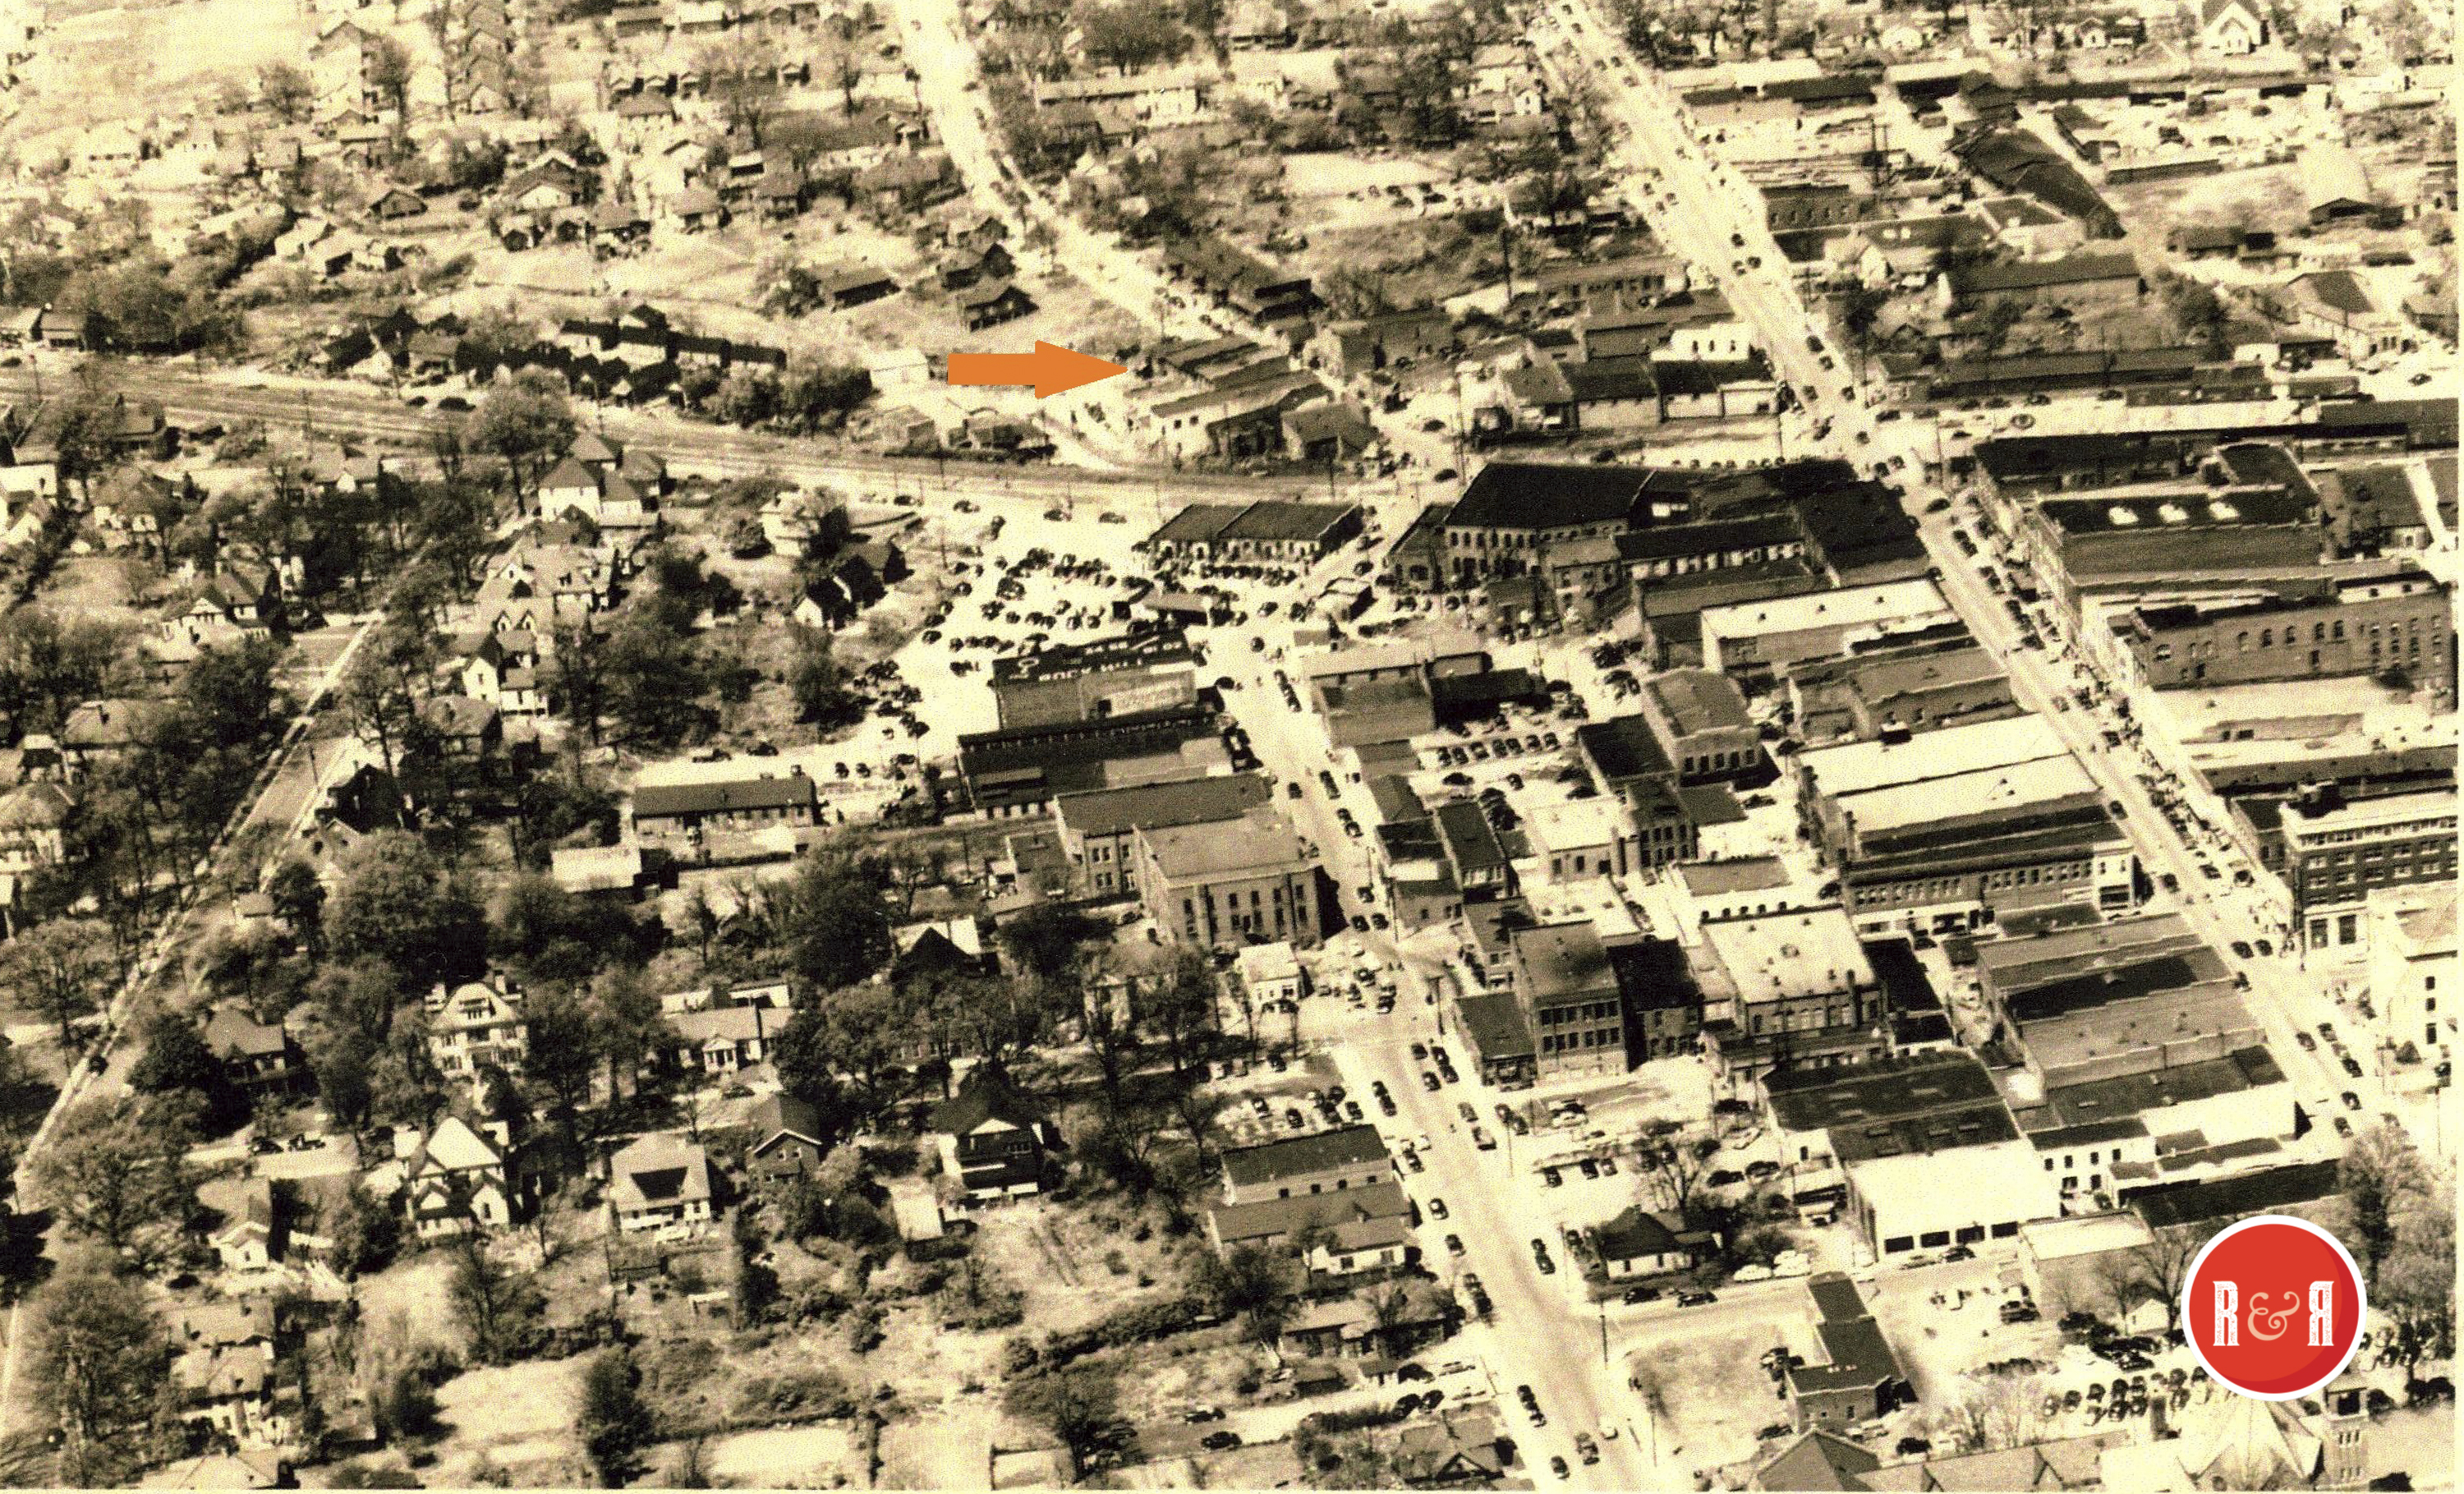 AERIAL PHOTO OF THE AREA - 1960'S